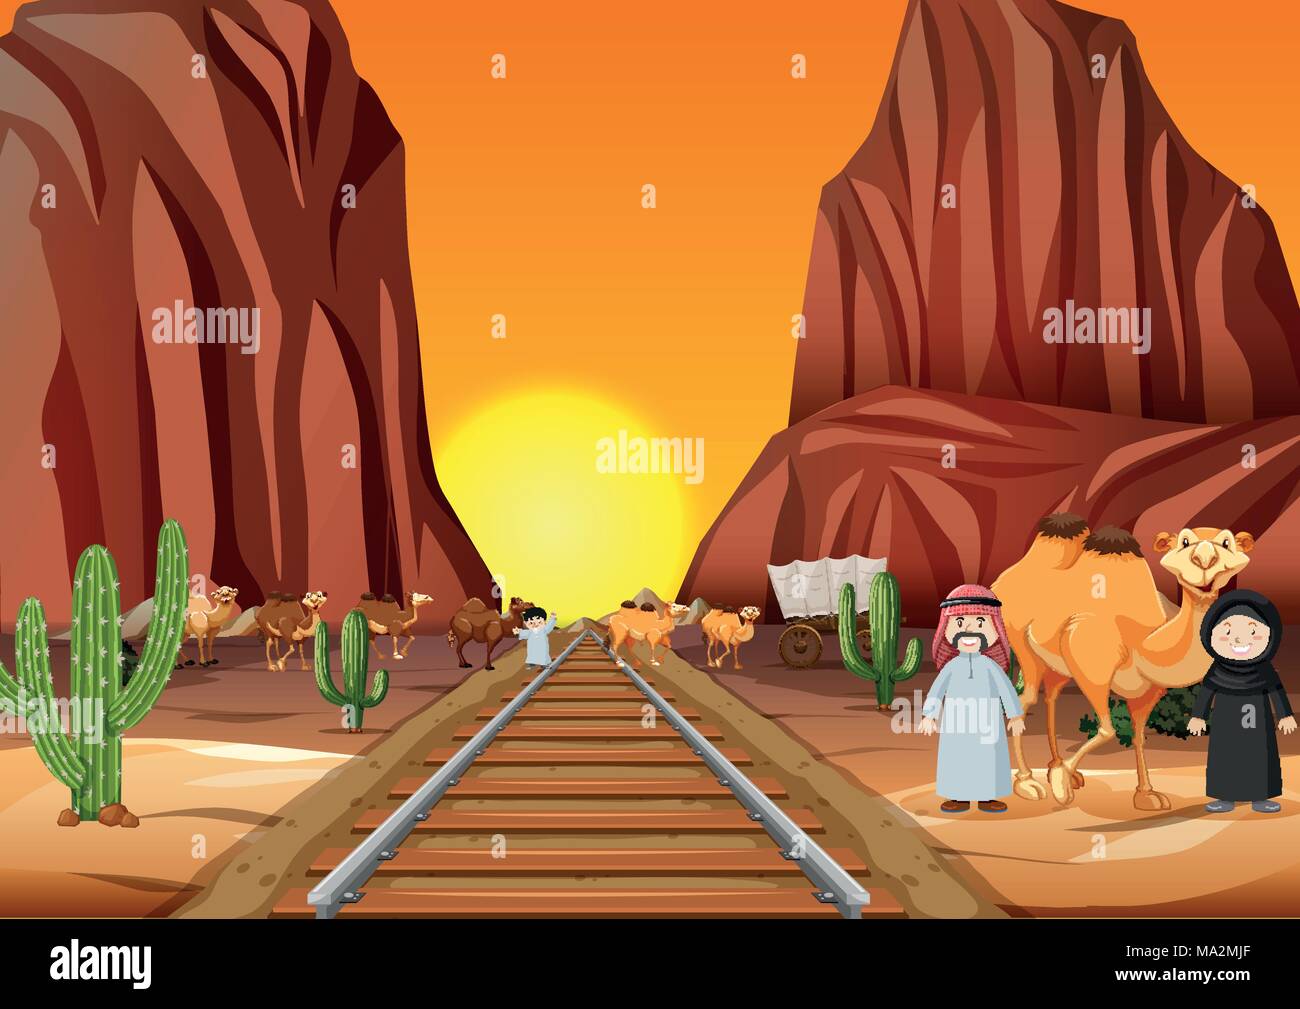 Camels and arab people crossing the railroad at sunset illustration Stock Vector